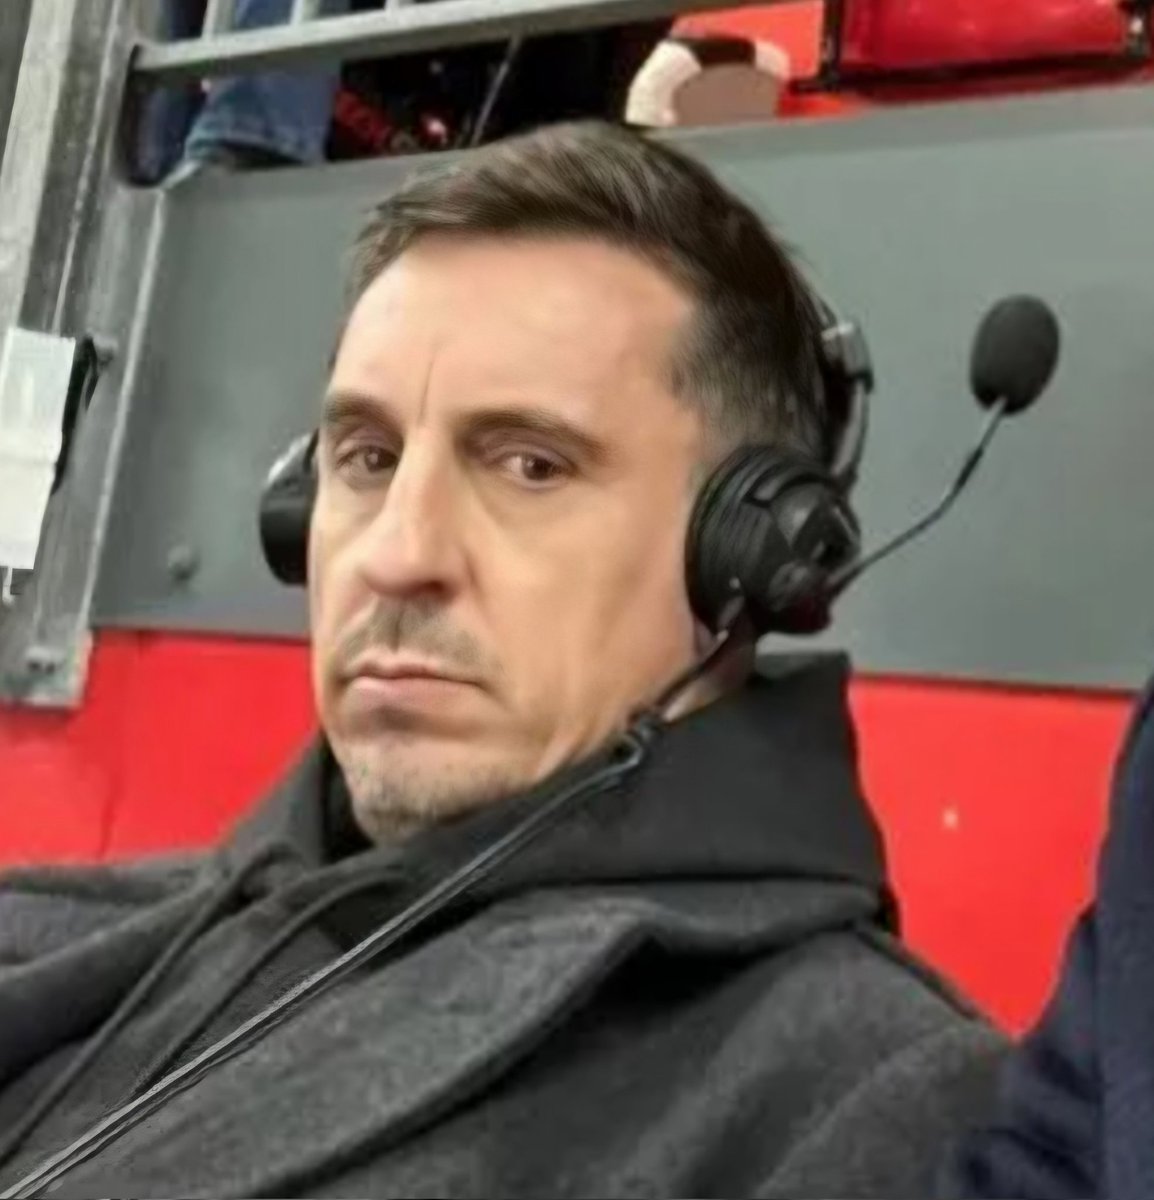 The day after the long bank holiday weekend feeling Day 241 of @'ing @GNev2 until he listens to our music